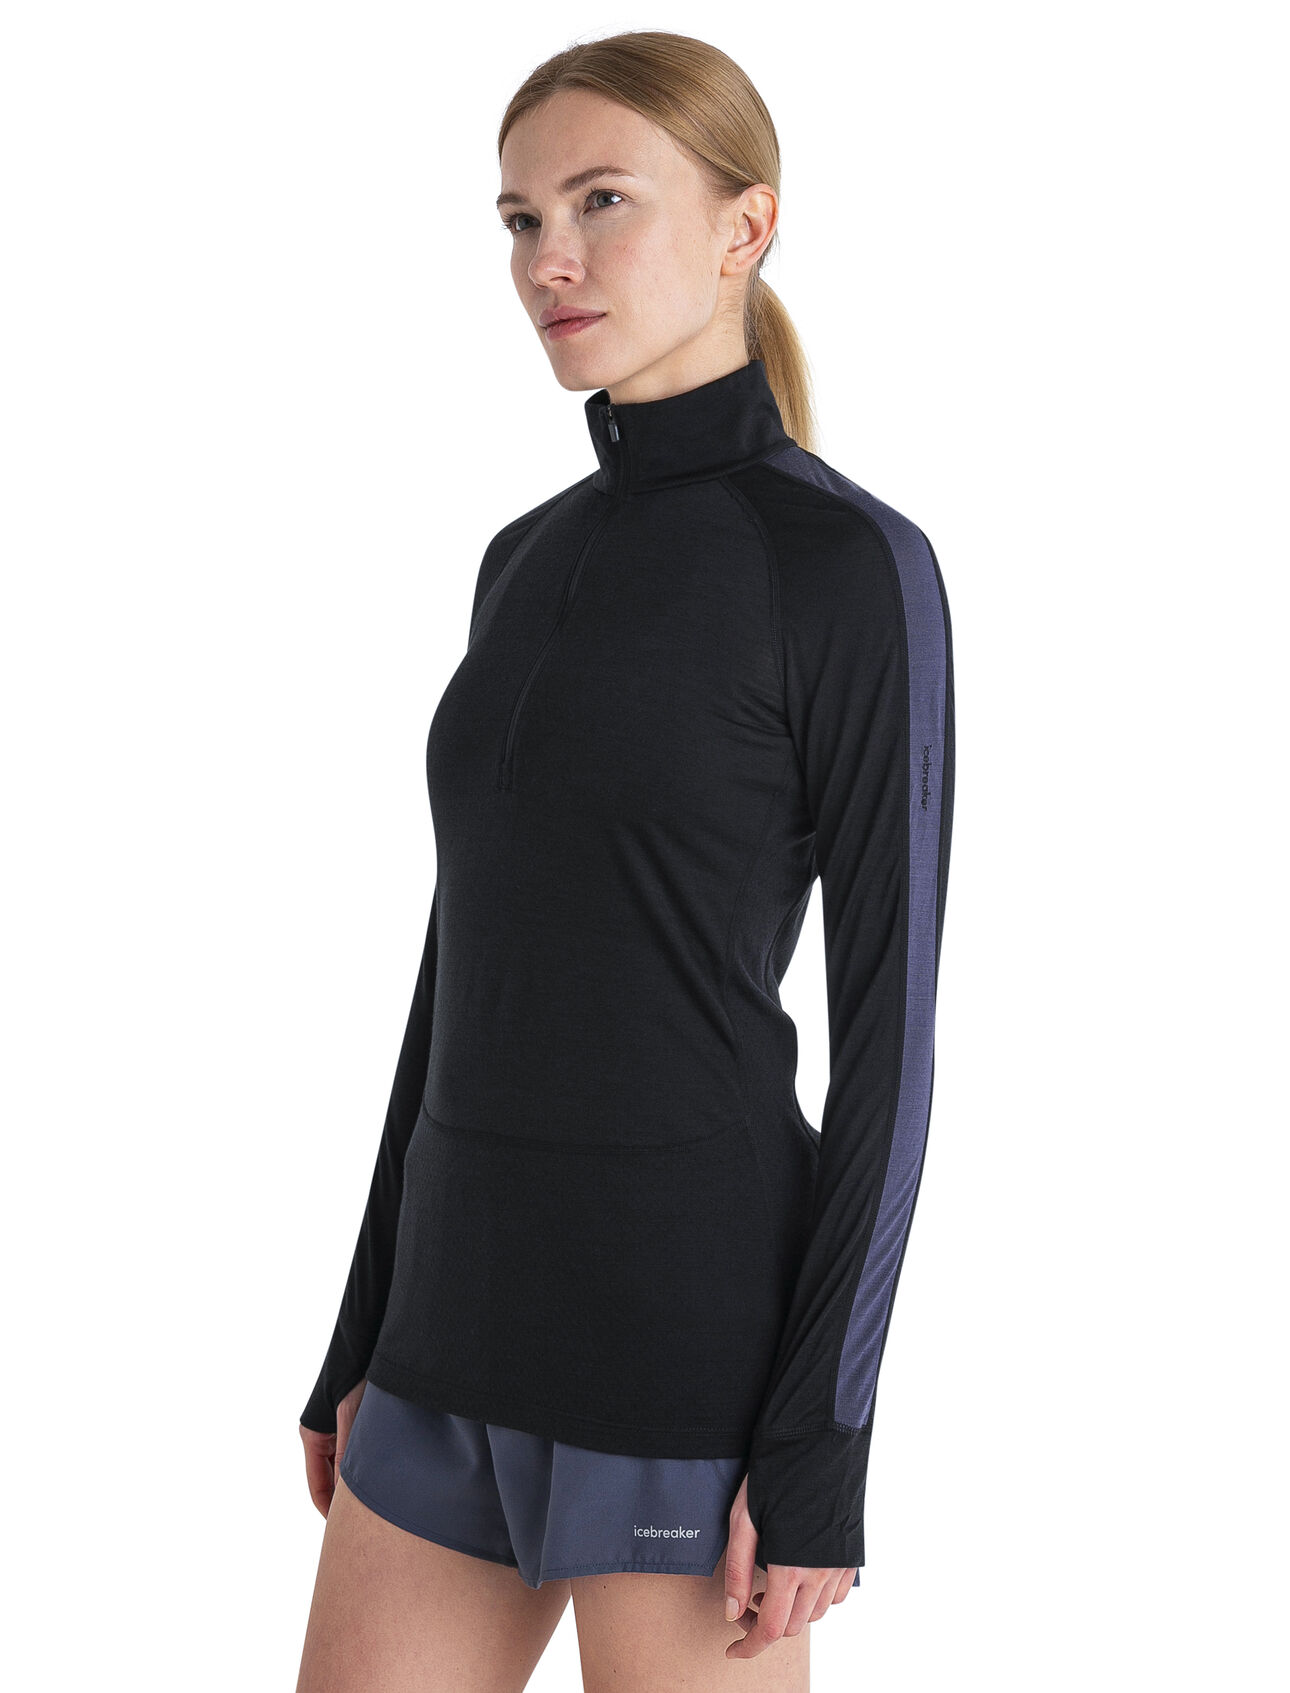 Womens 125 ZoneKnit™ Merino Blend Long Sleeve Half Zip Thermal Top A versatile, body-mapped zip-neck top that’s ideal for high-intensity adventures, the Merino 125 ZoneKnit™Long Sleeve Half Zip features our Cool-Lite™ jersey, which blends TENCEL™ and merino wool to naturally keep you cool.